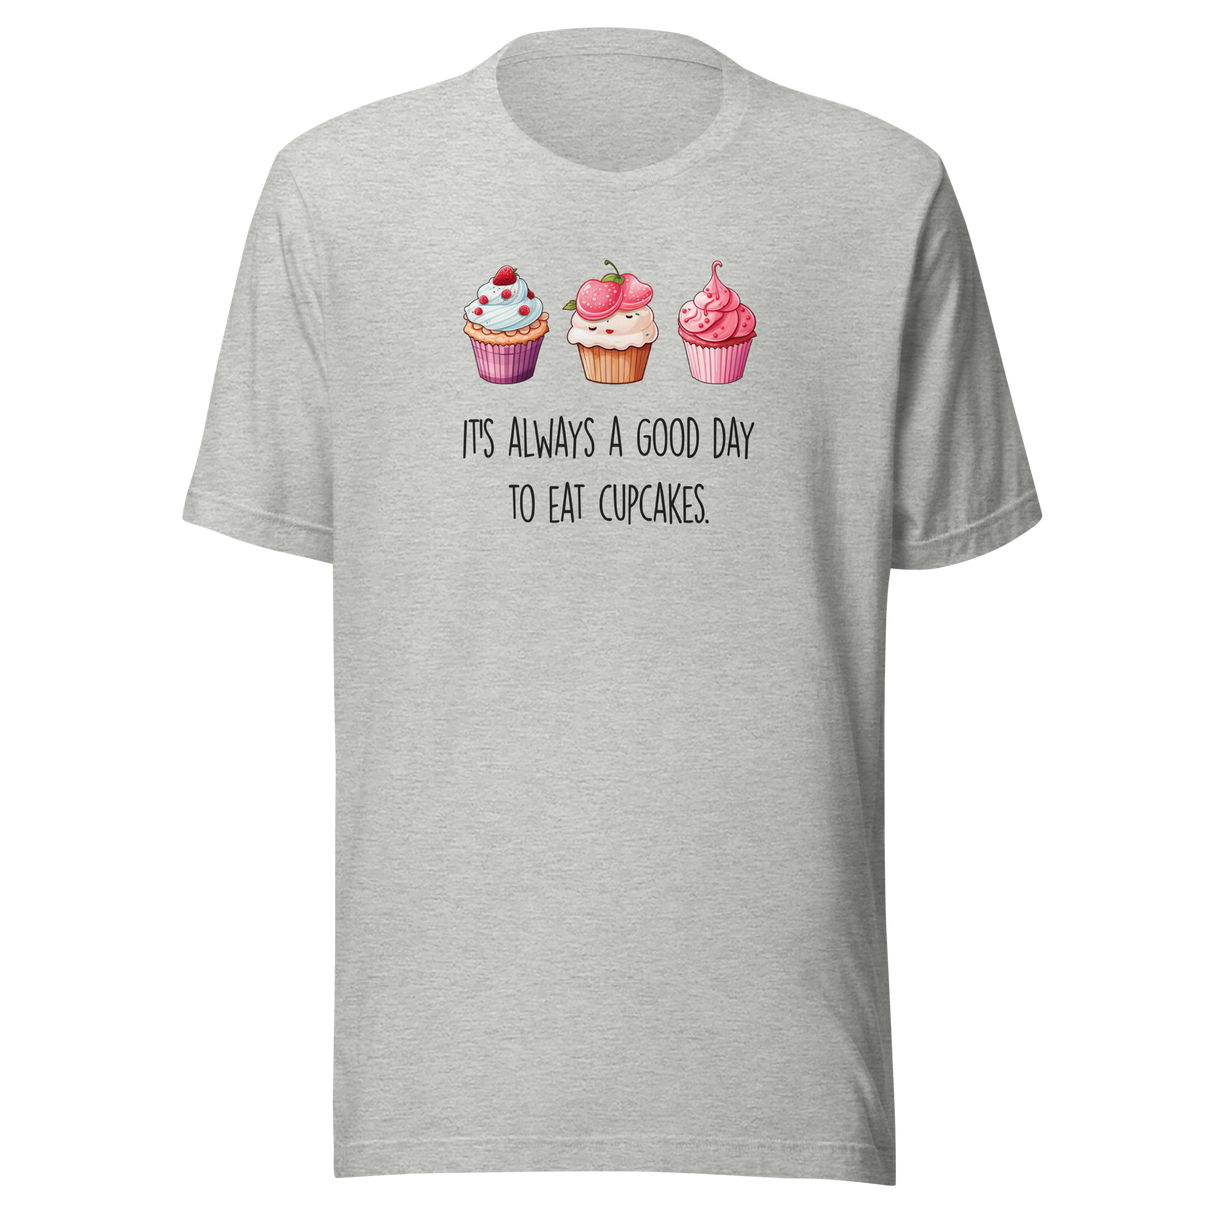 its-always-a-good-day-to-eat-cupcakes-cupcakes-tee-day-t-shirt-good-tee-t-shirt-tee#color_athletic-heather